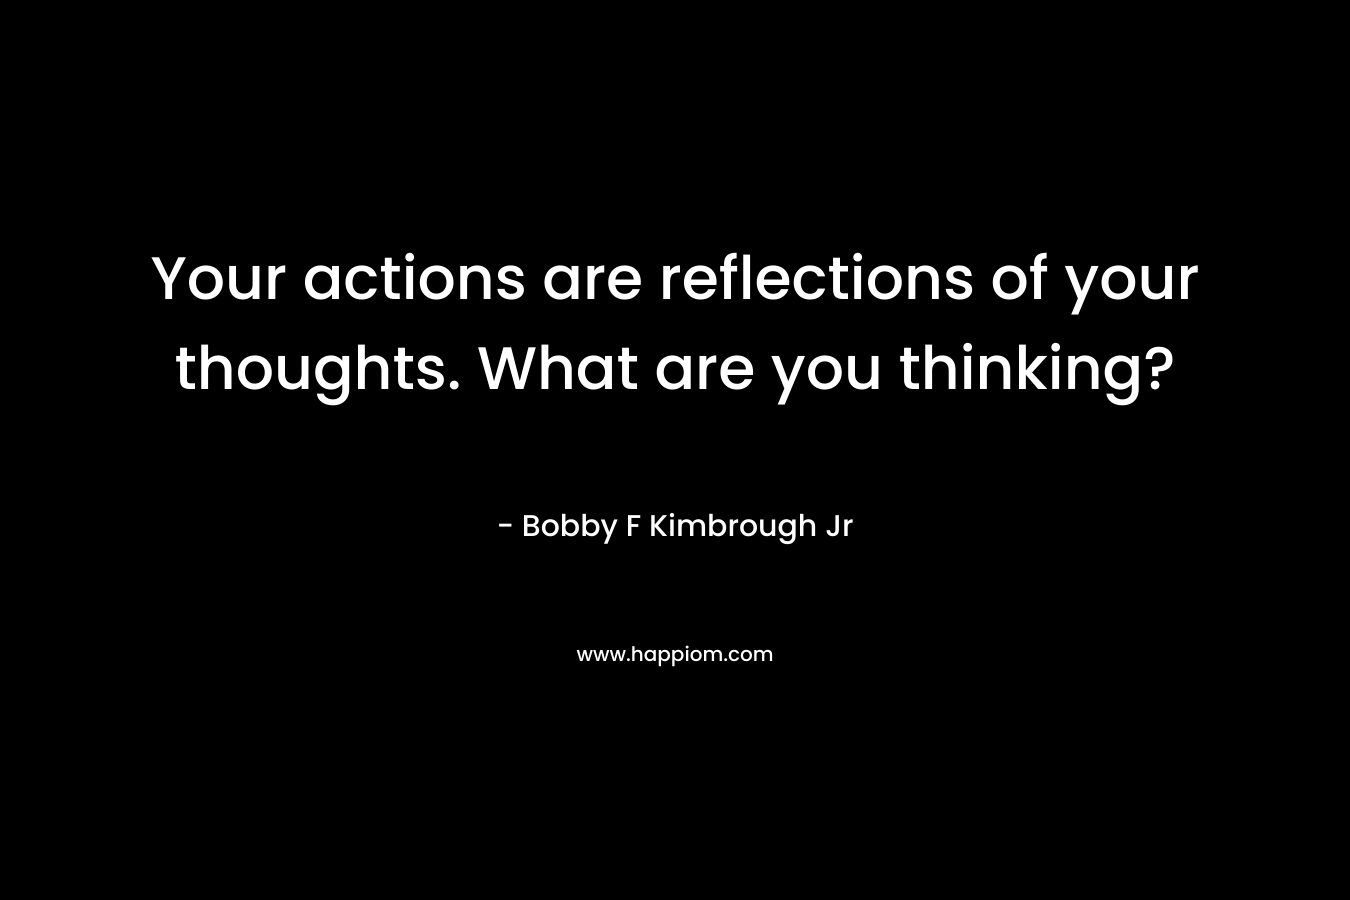 Your actions are reflections of your thoughts. What are you thinking?